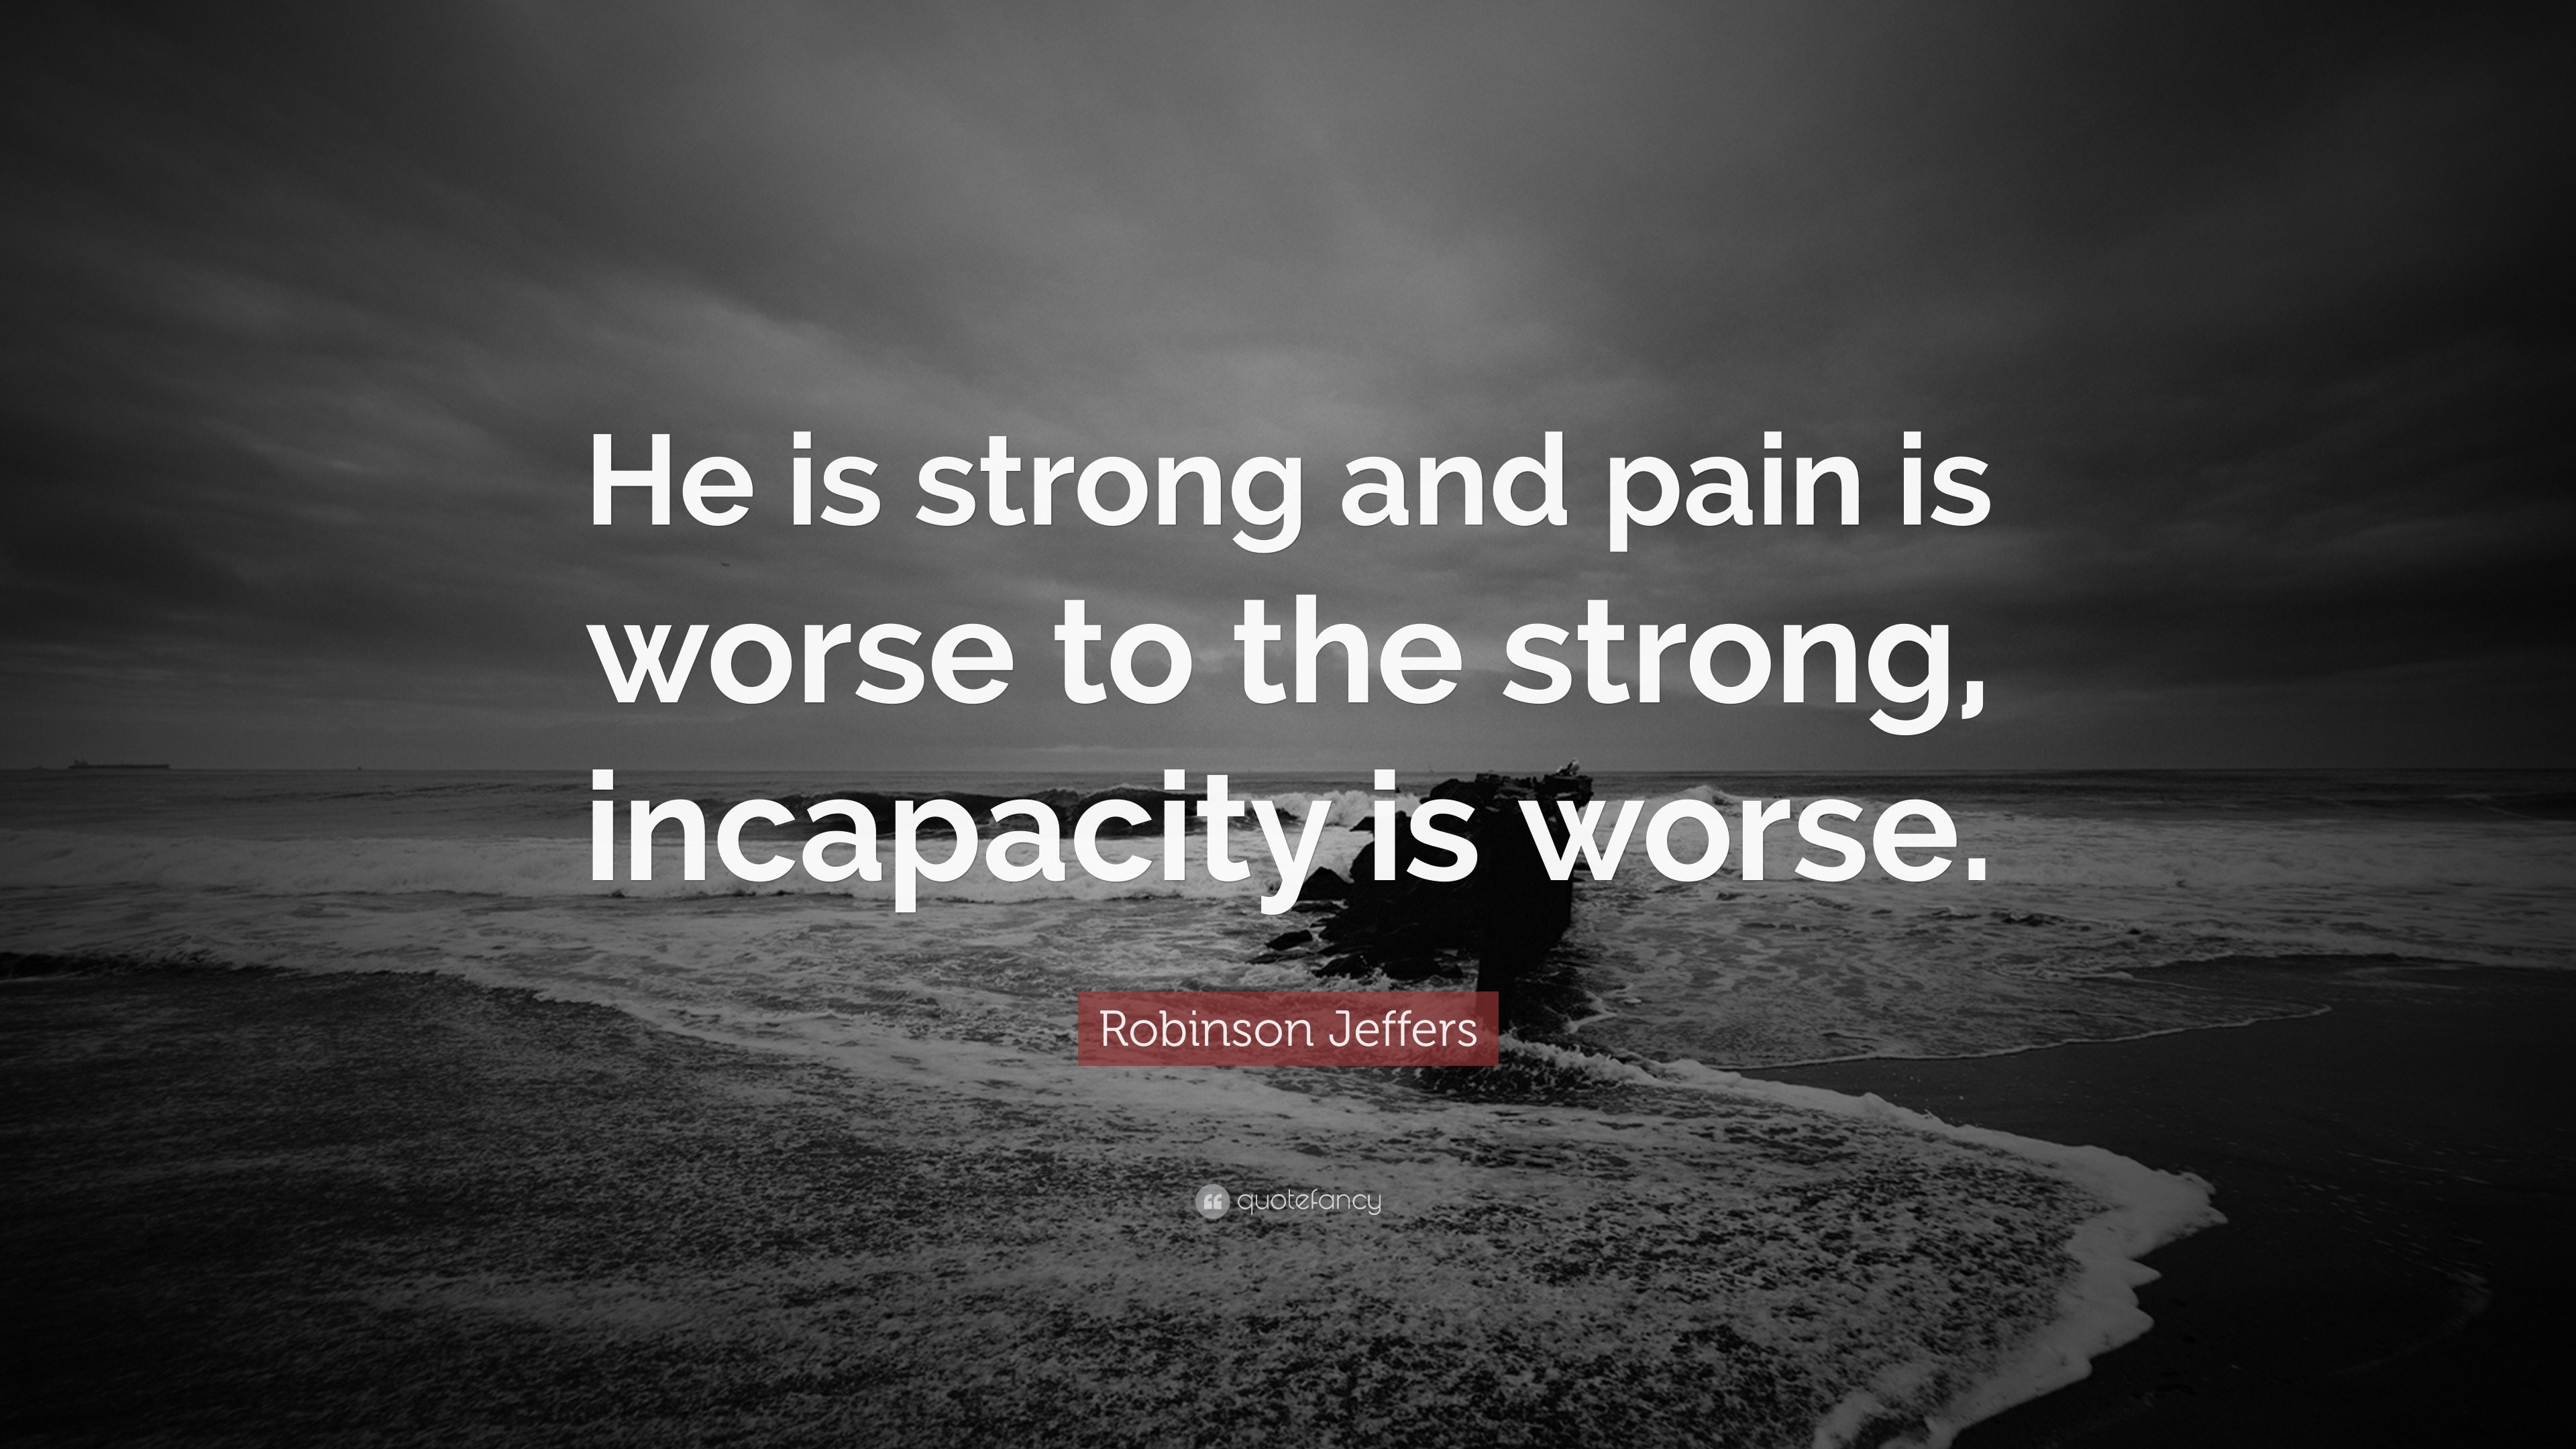 He is strong and pain is worse to the strong, incapacity is worse. 